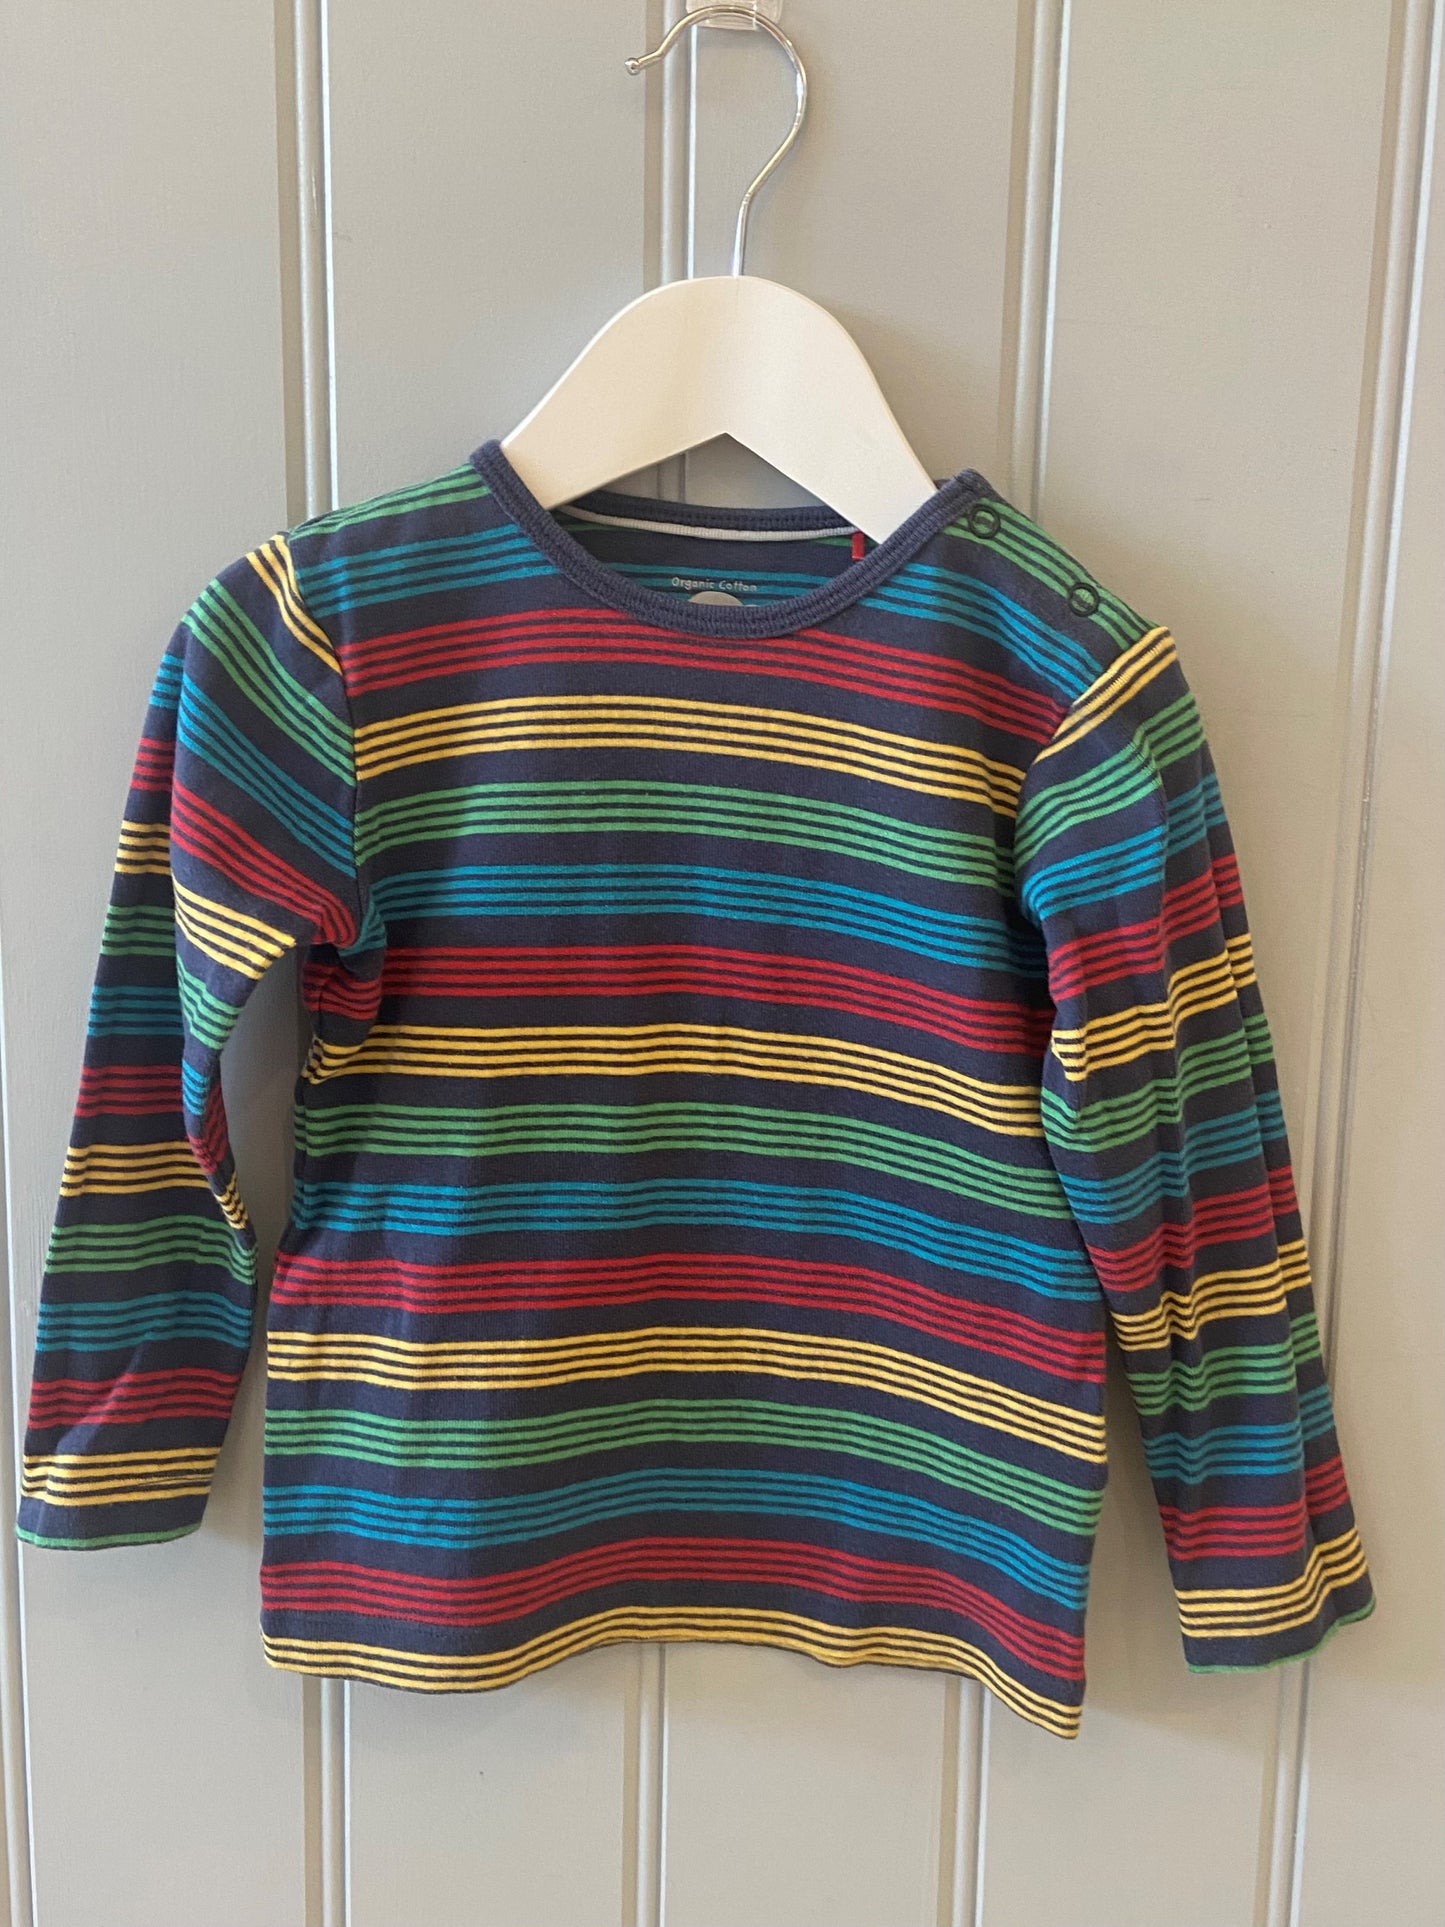 Pre-loved Striped LS Tee by Frugi